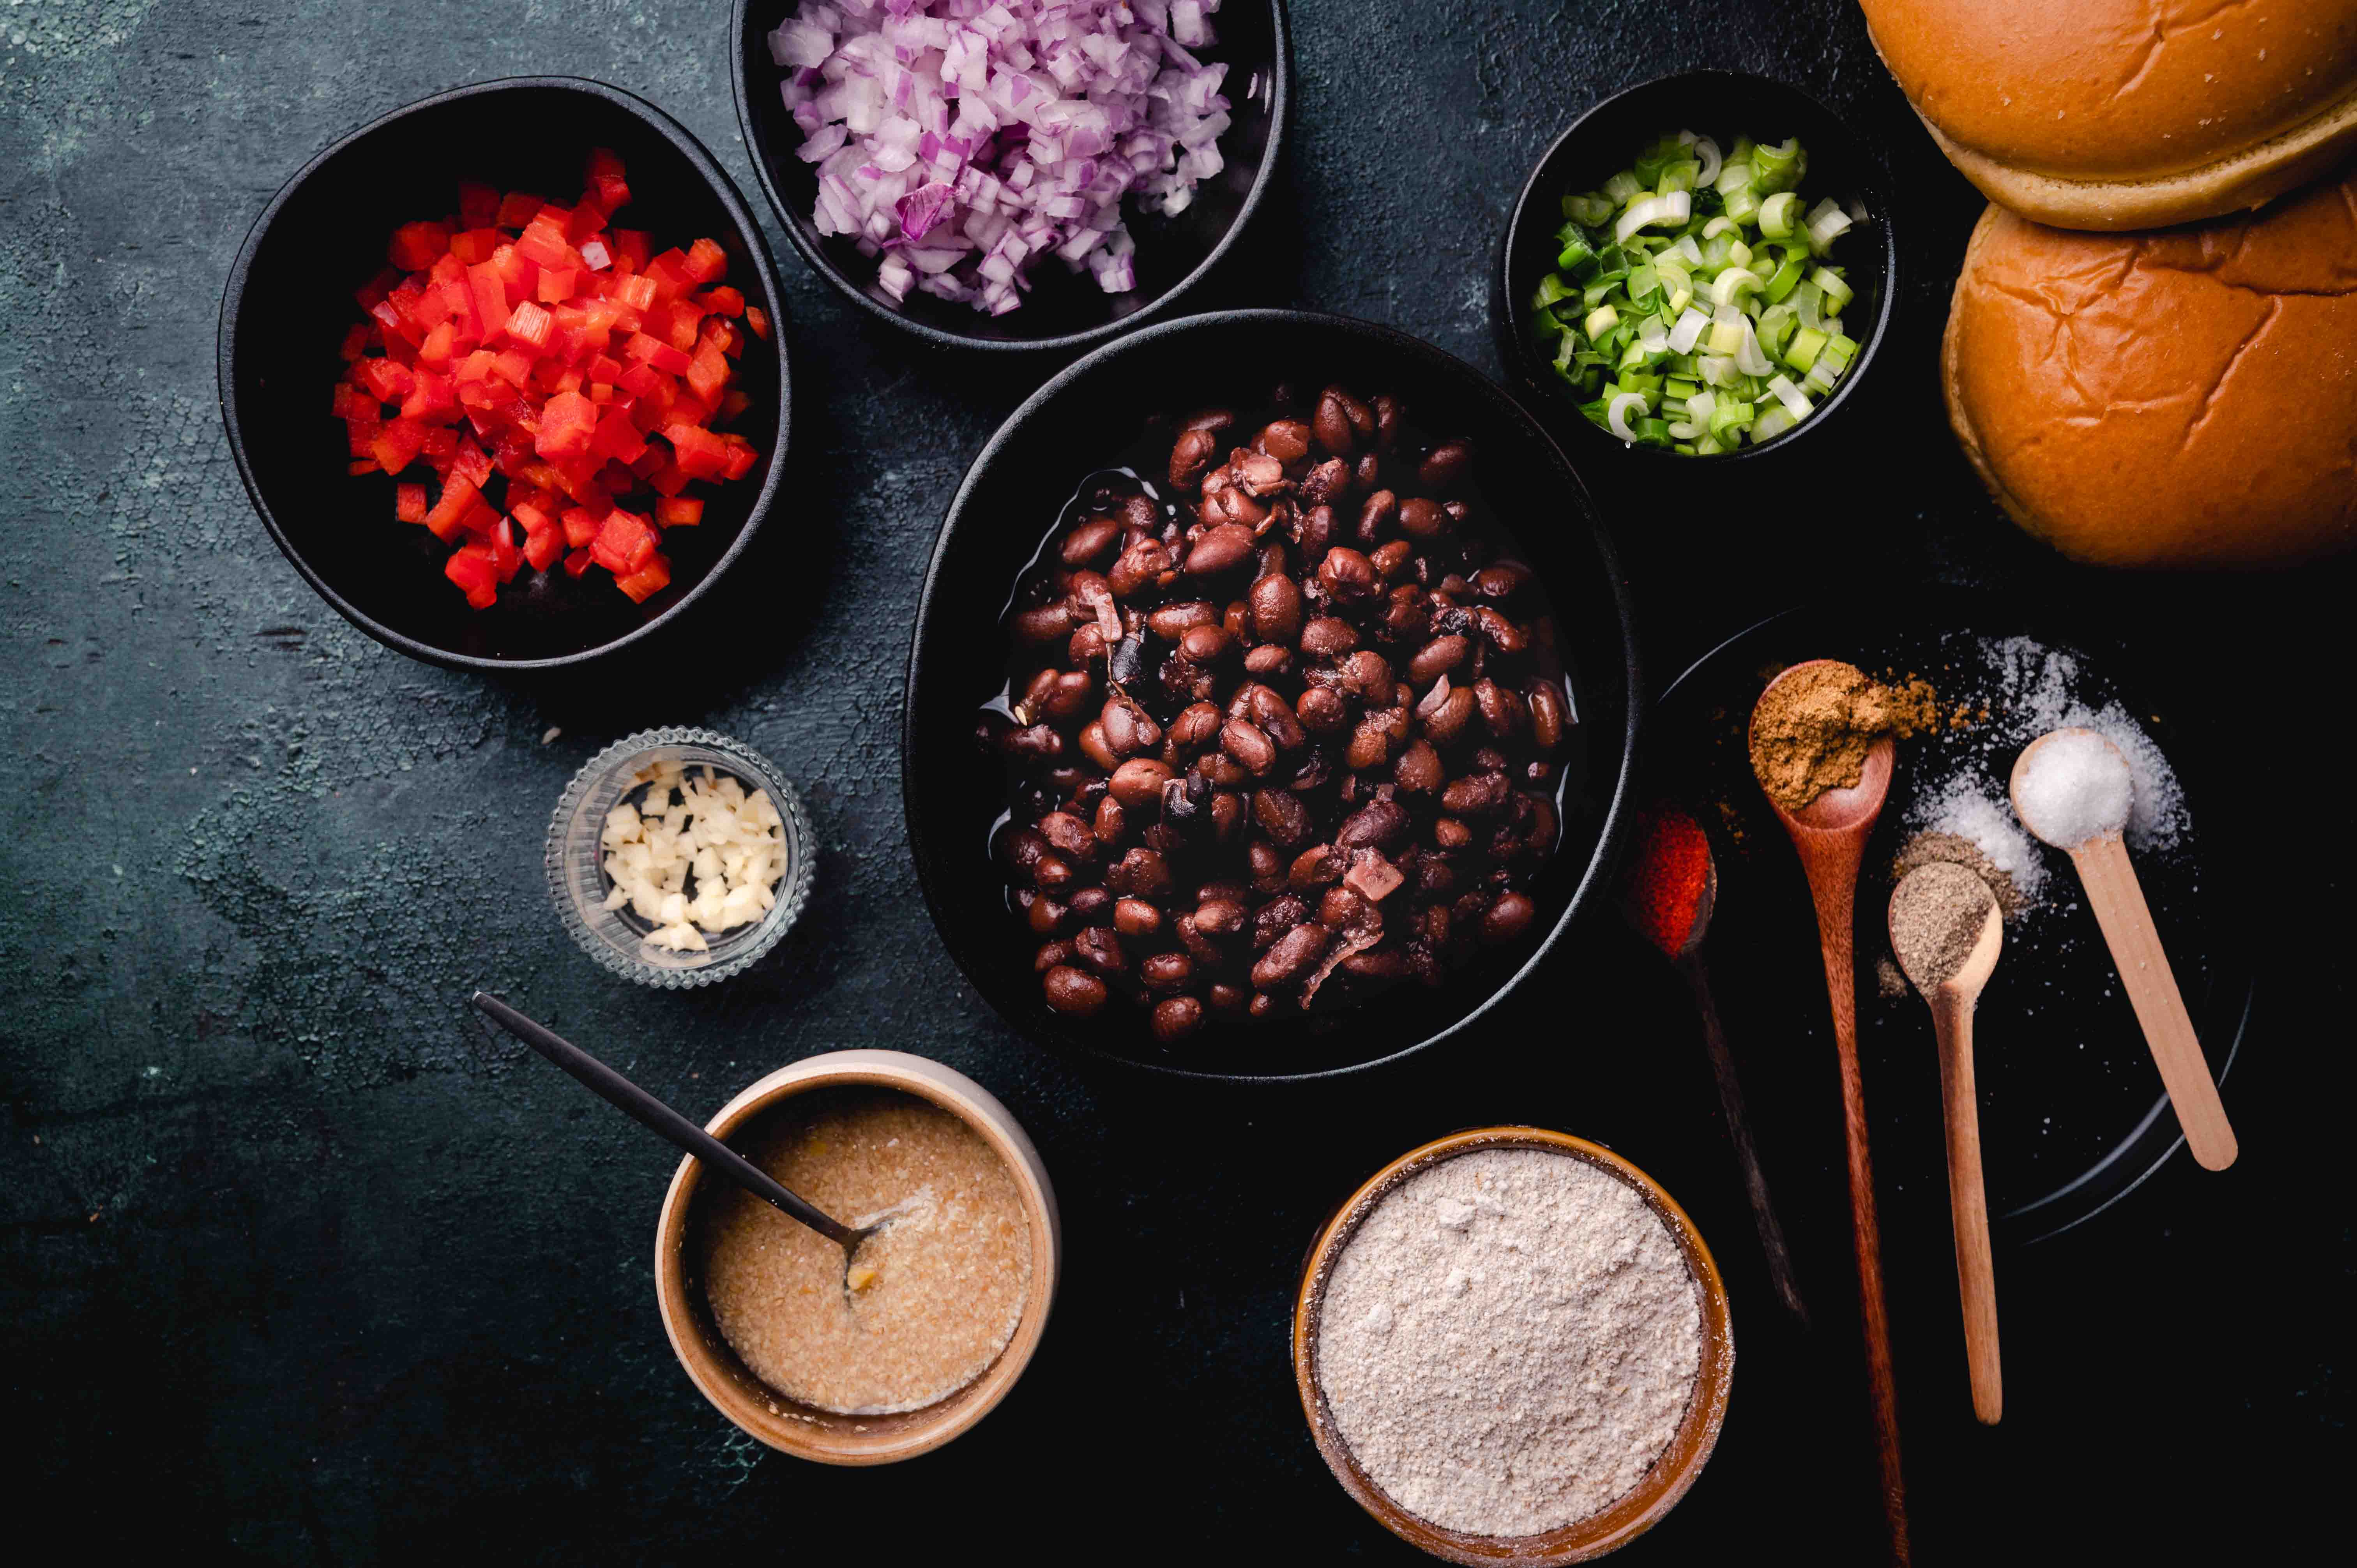 Overhead view of a kitchen counter with ingredients for cooking, featuring bowls of beans, chopped vegetables, spices, and bread on a dark surface.